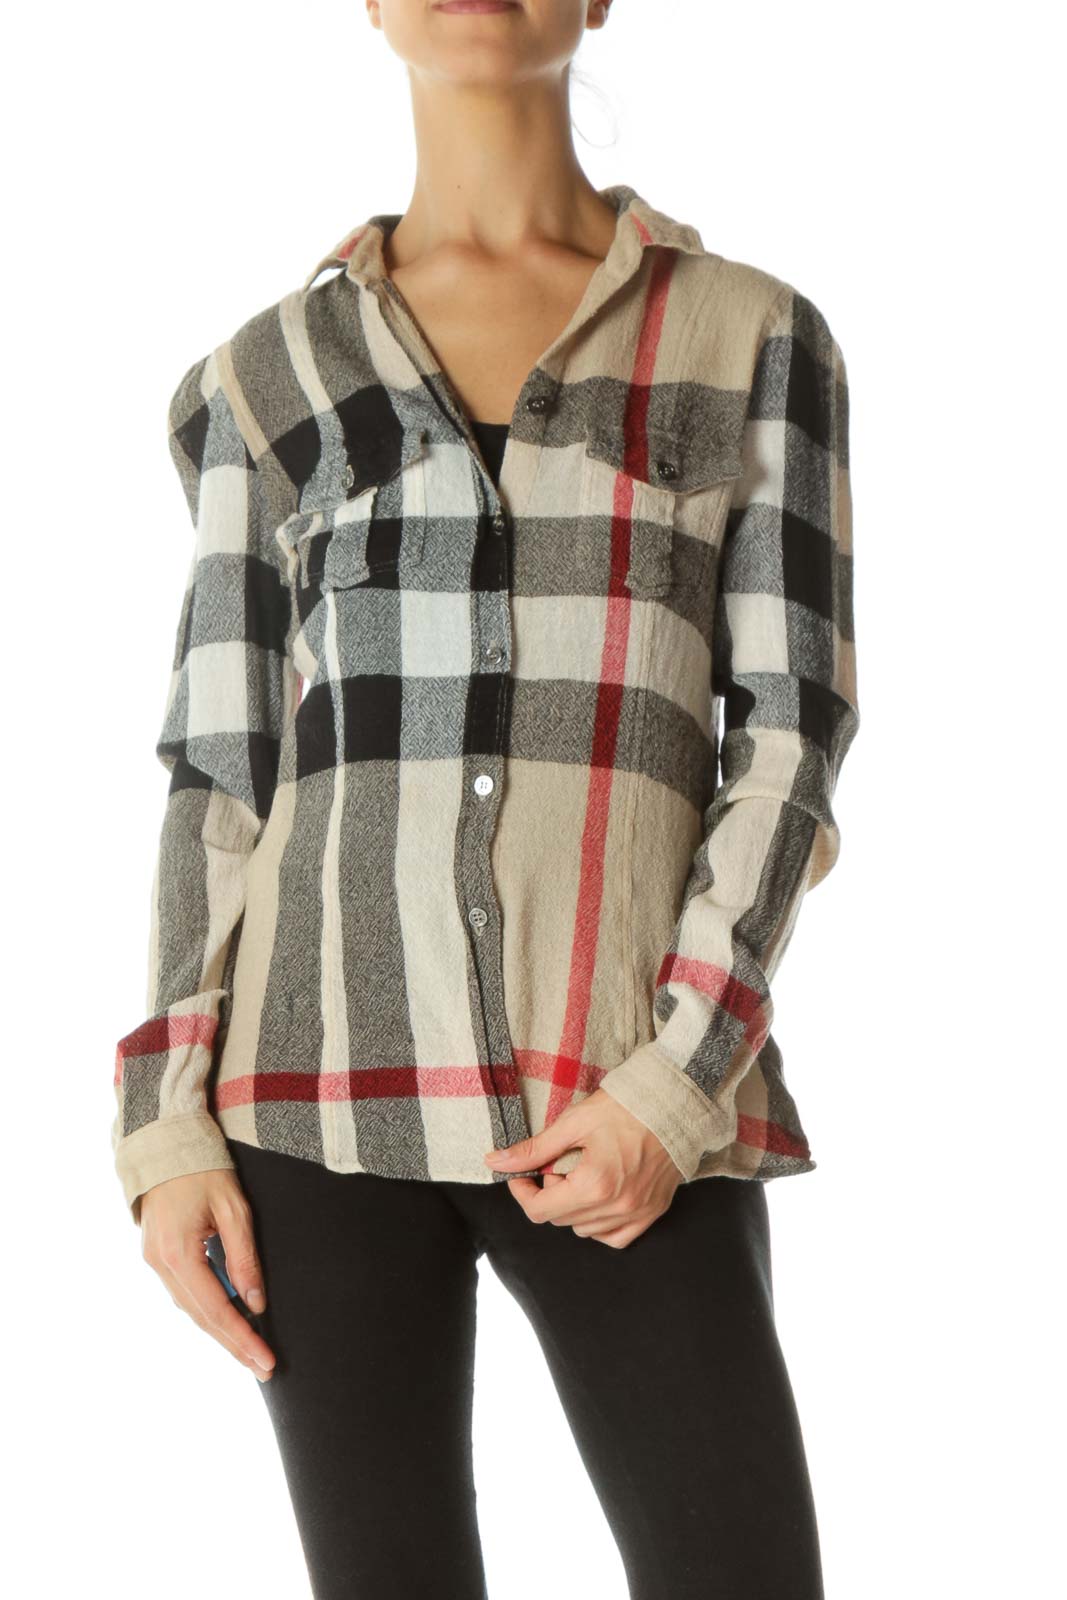 Tan, Black and Red Plaid Shirt Front